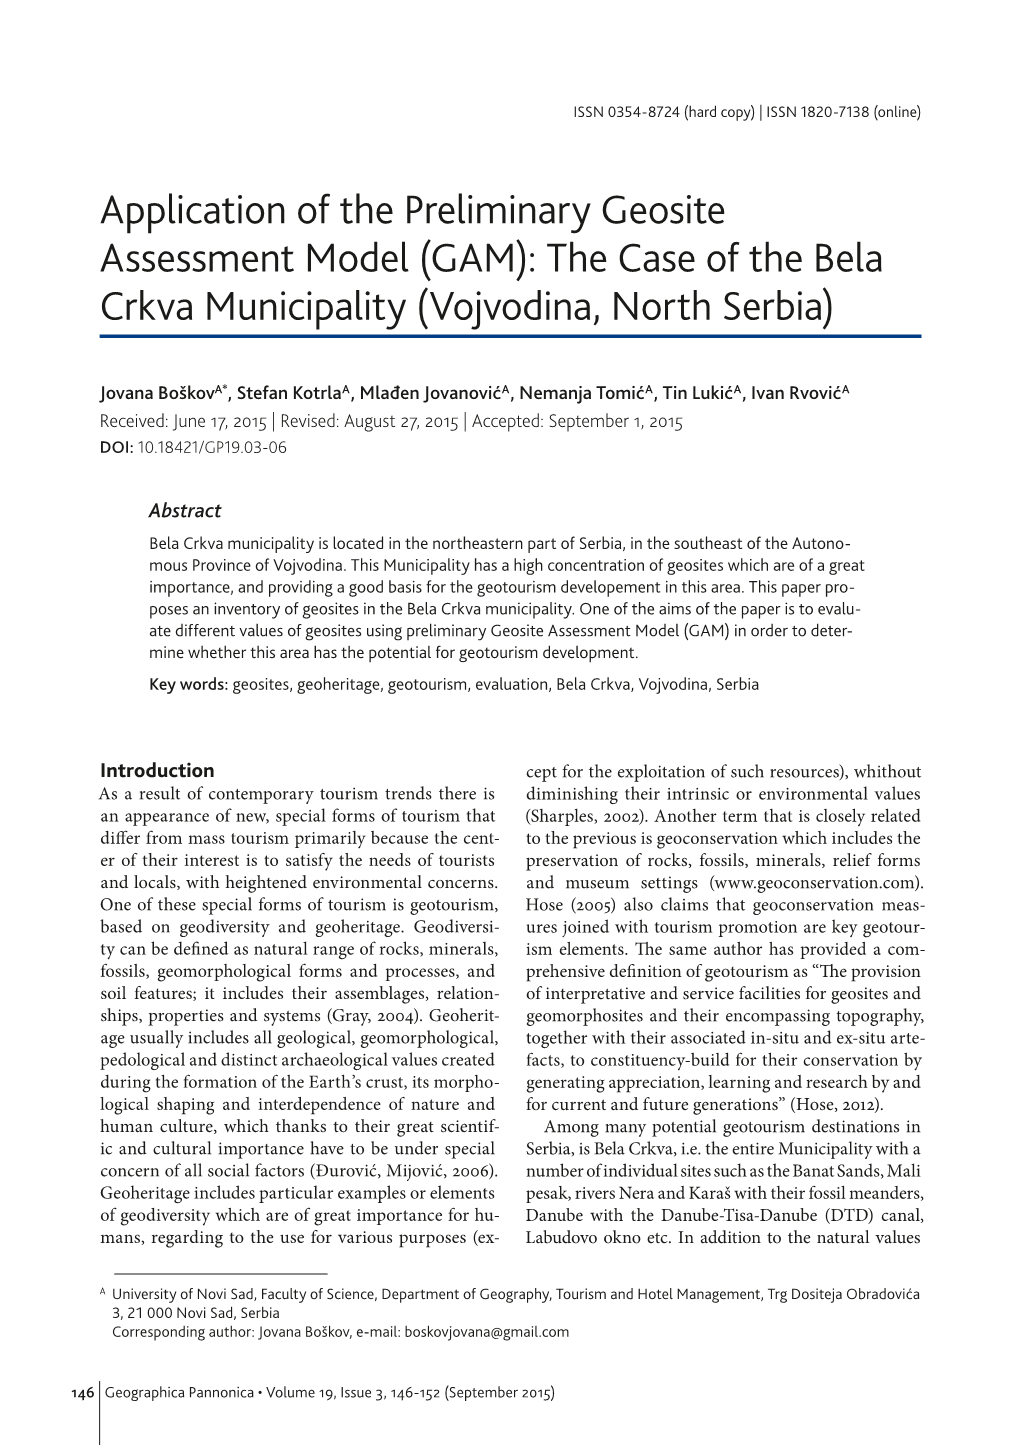 Аpplication of the Preliminary Geosite Assessment Model (GAM): the Case of the Bela Crkva Municipality (Vojvodina, North Serbia)